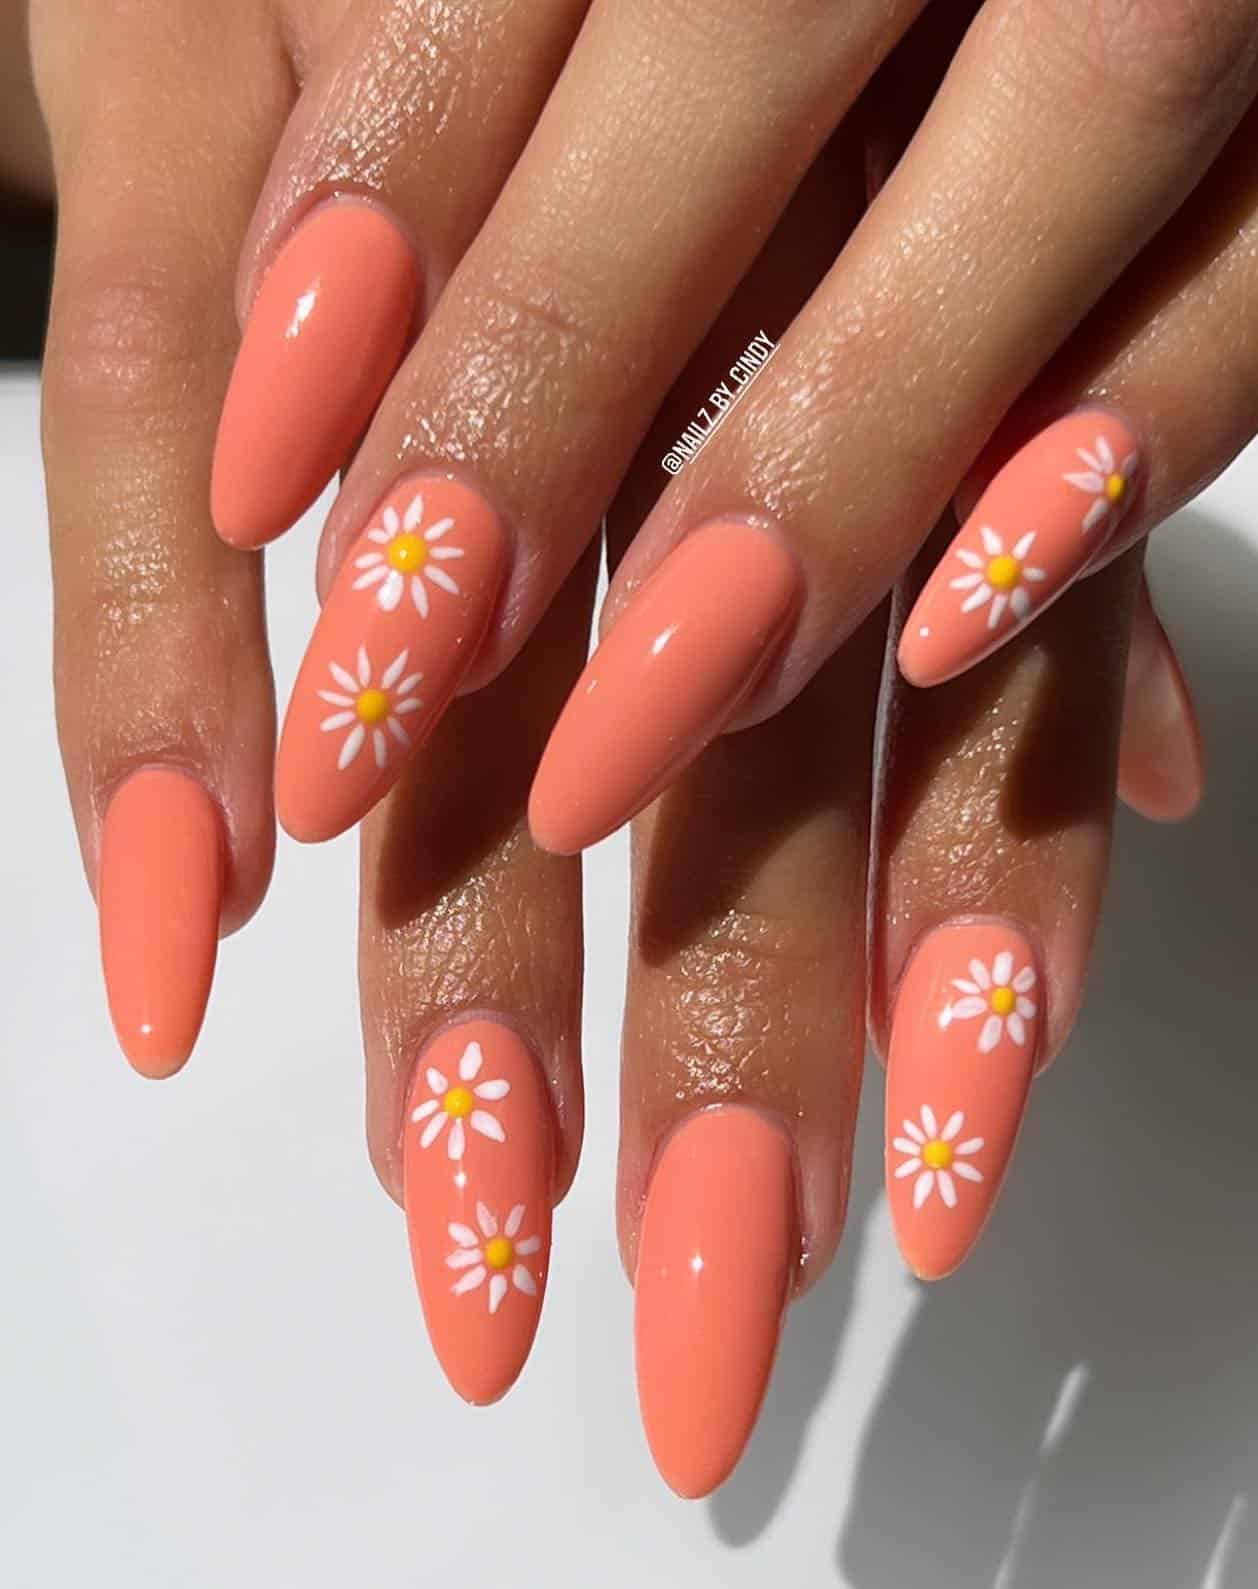 A hand with long almond nails painted with a coral peach nail polish and with accent nails featuring white flowers